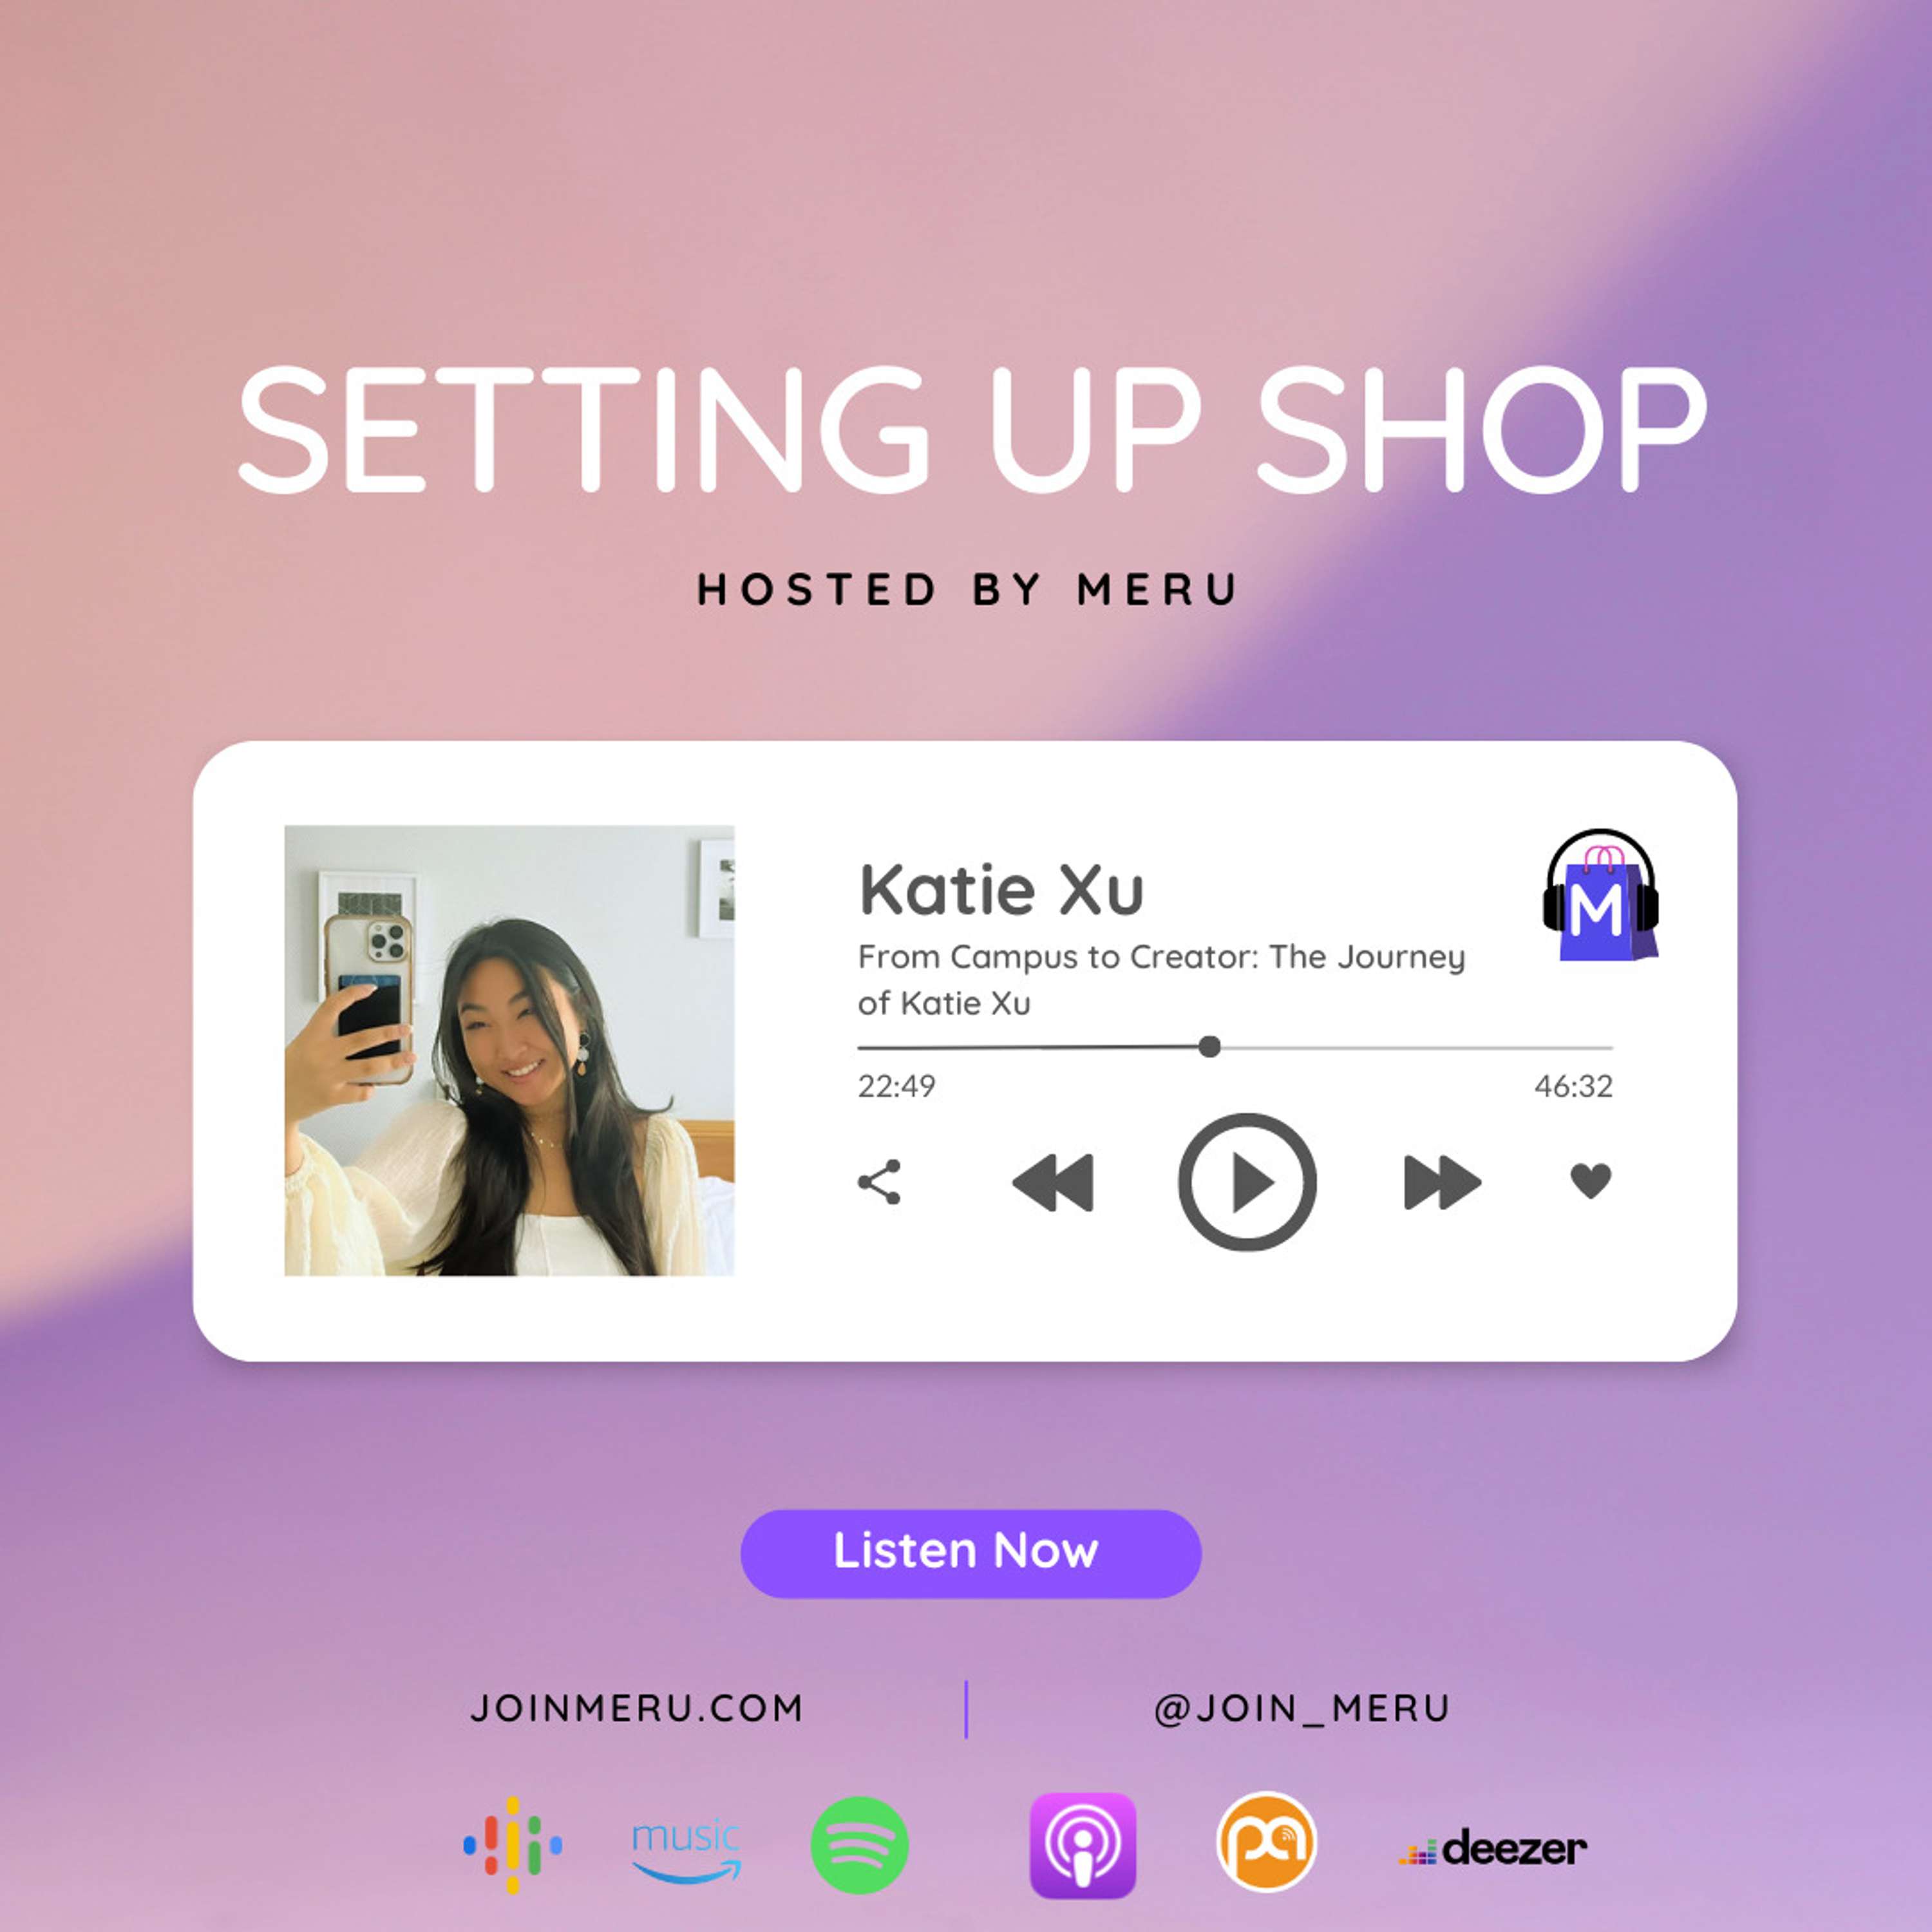 From Campus to Creator: The Journey of Katie Xu